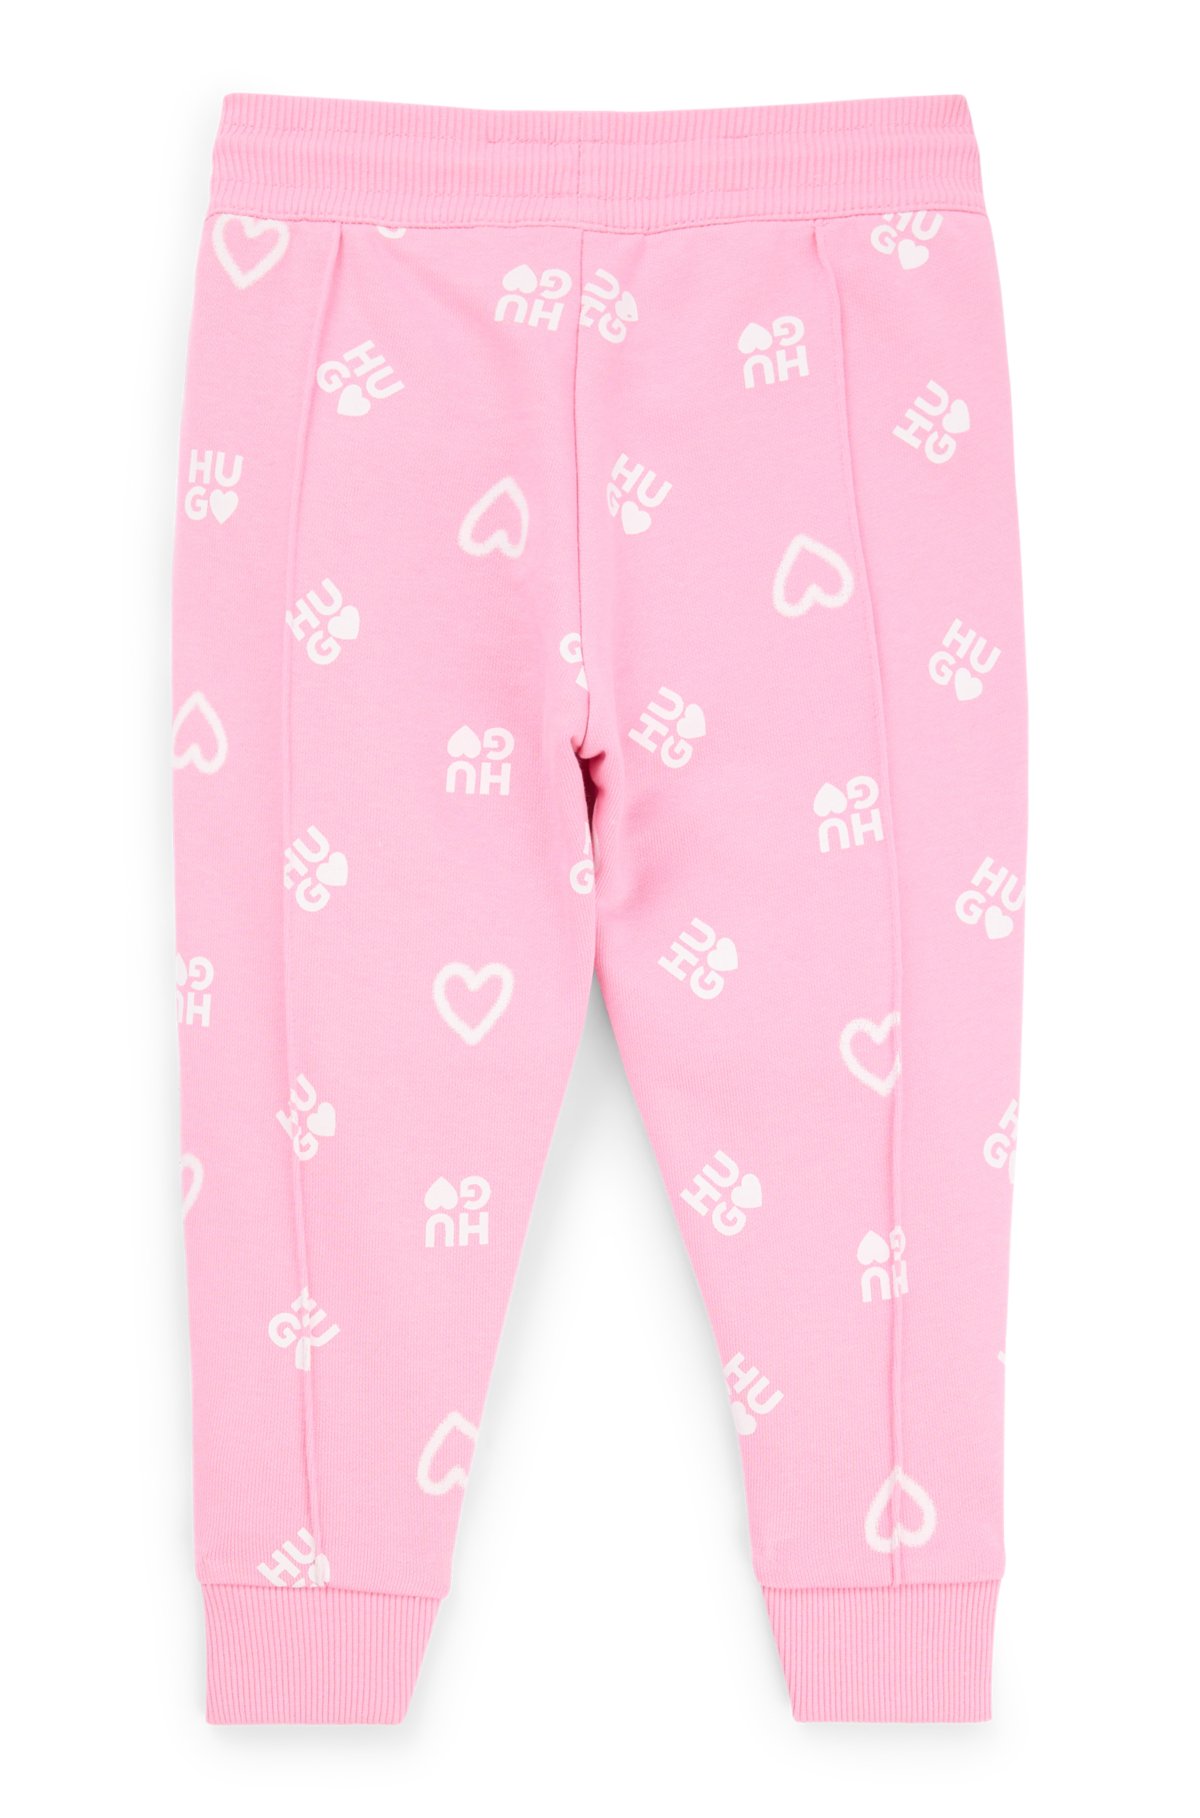 Kids' cotton-blend tracksuit bottoms with hearts and logos, Pink